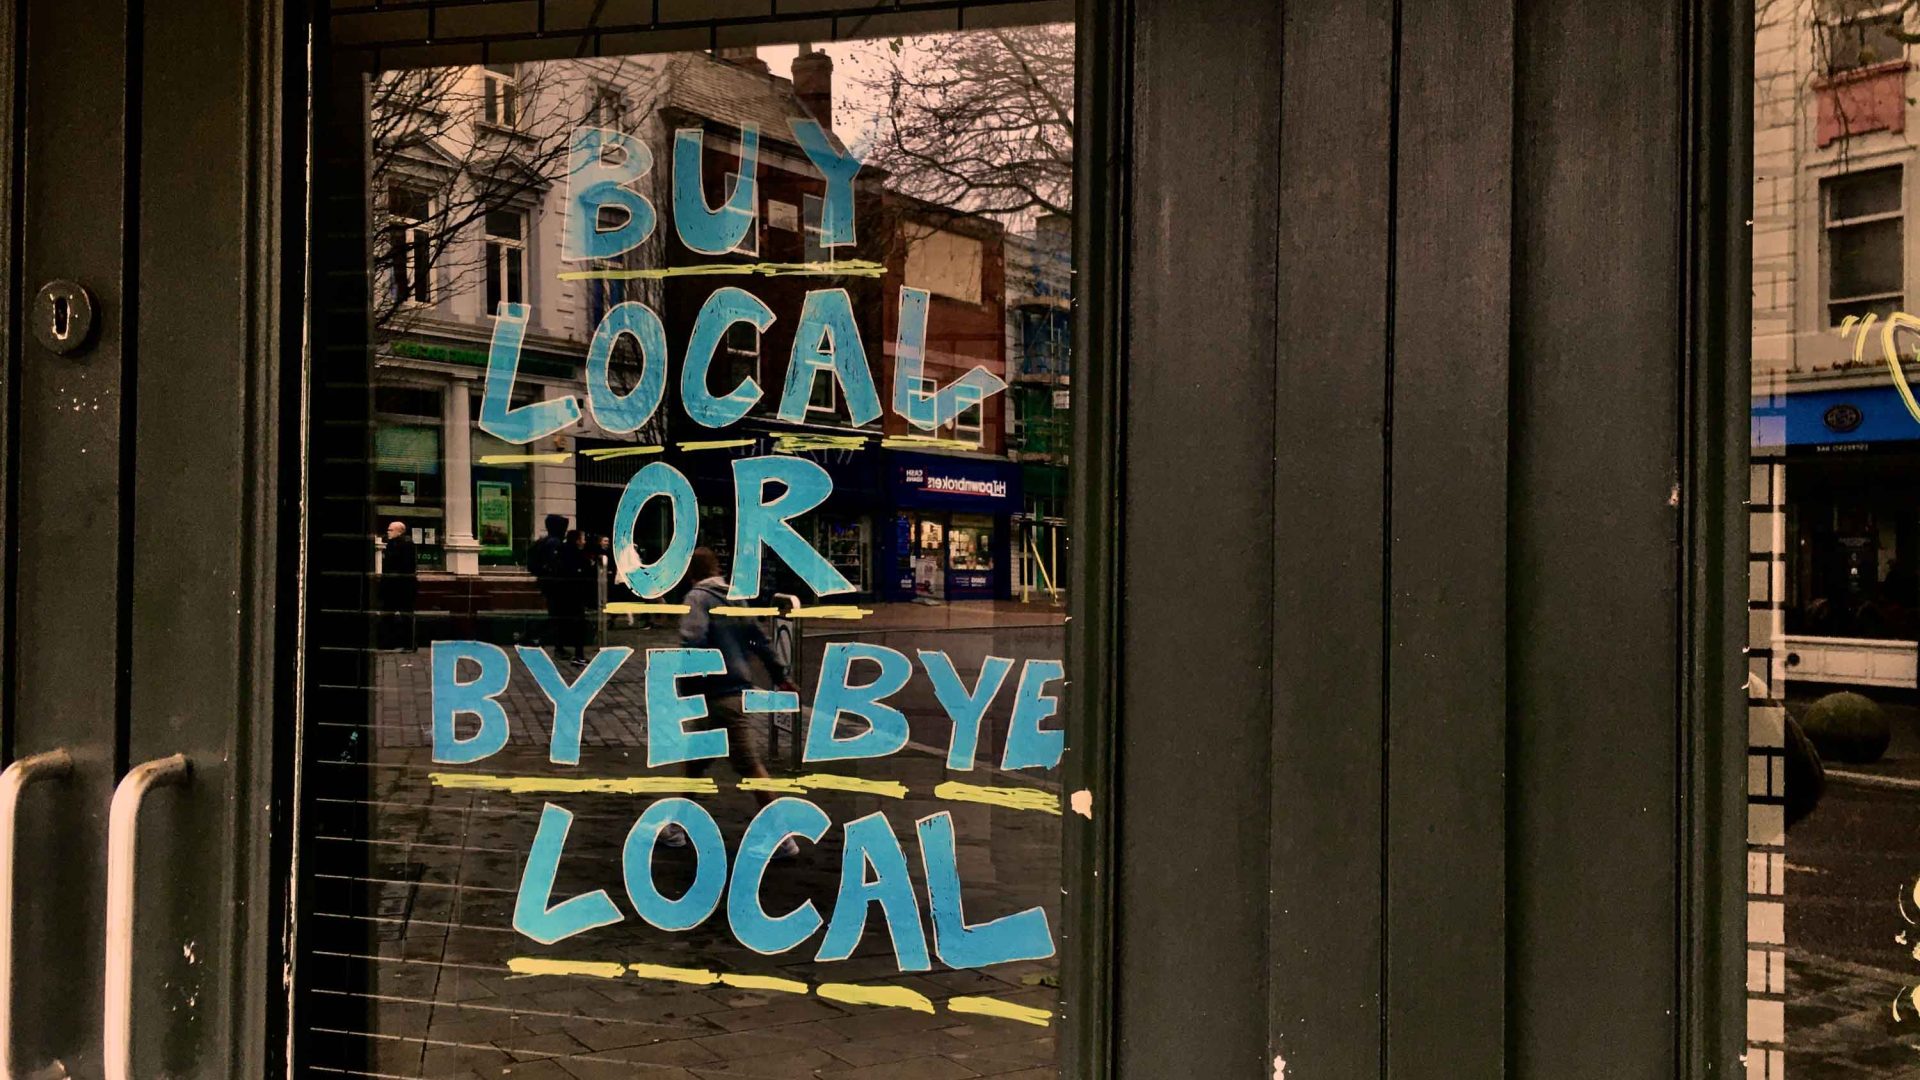 A sign in the front of a business reads "Buy local or bye bye local".